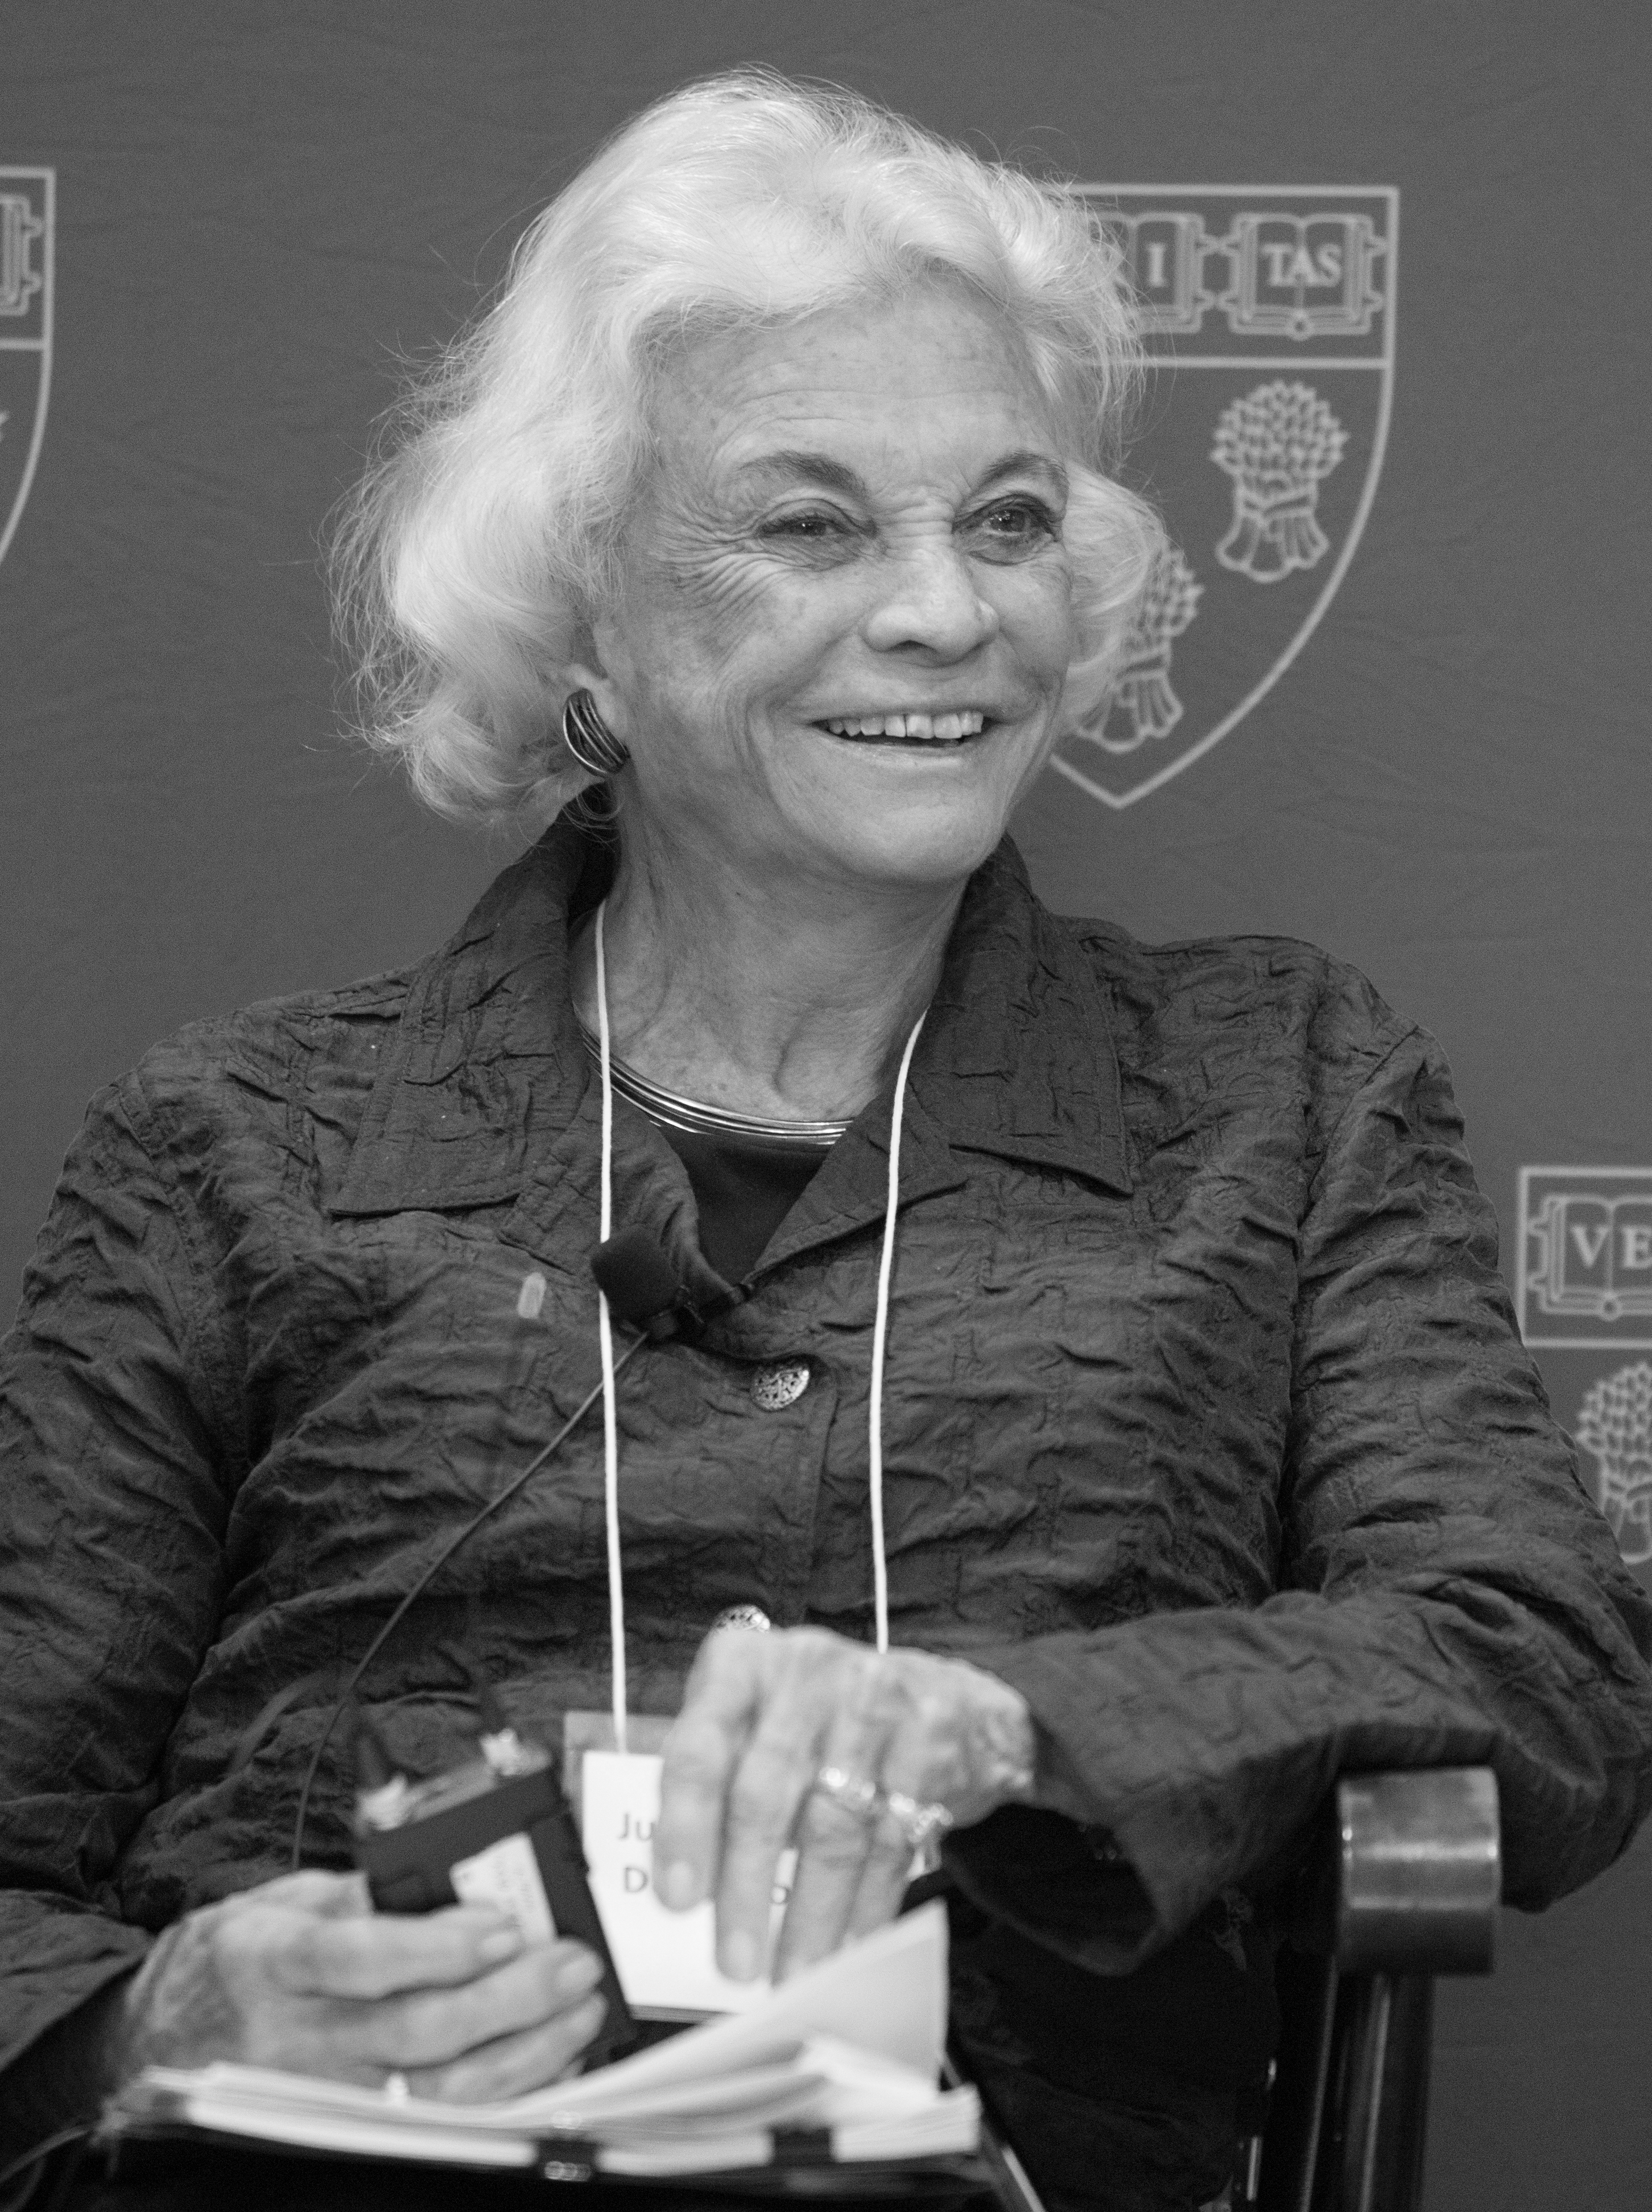 pictures of sandra day o connor